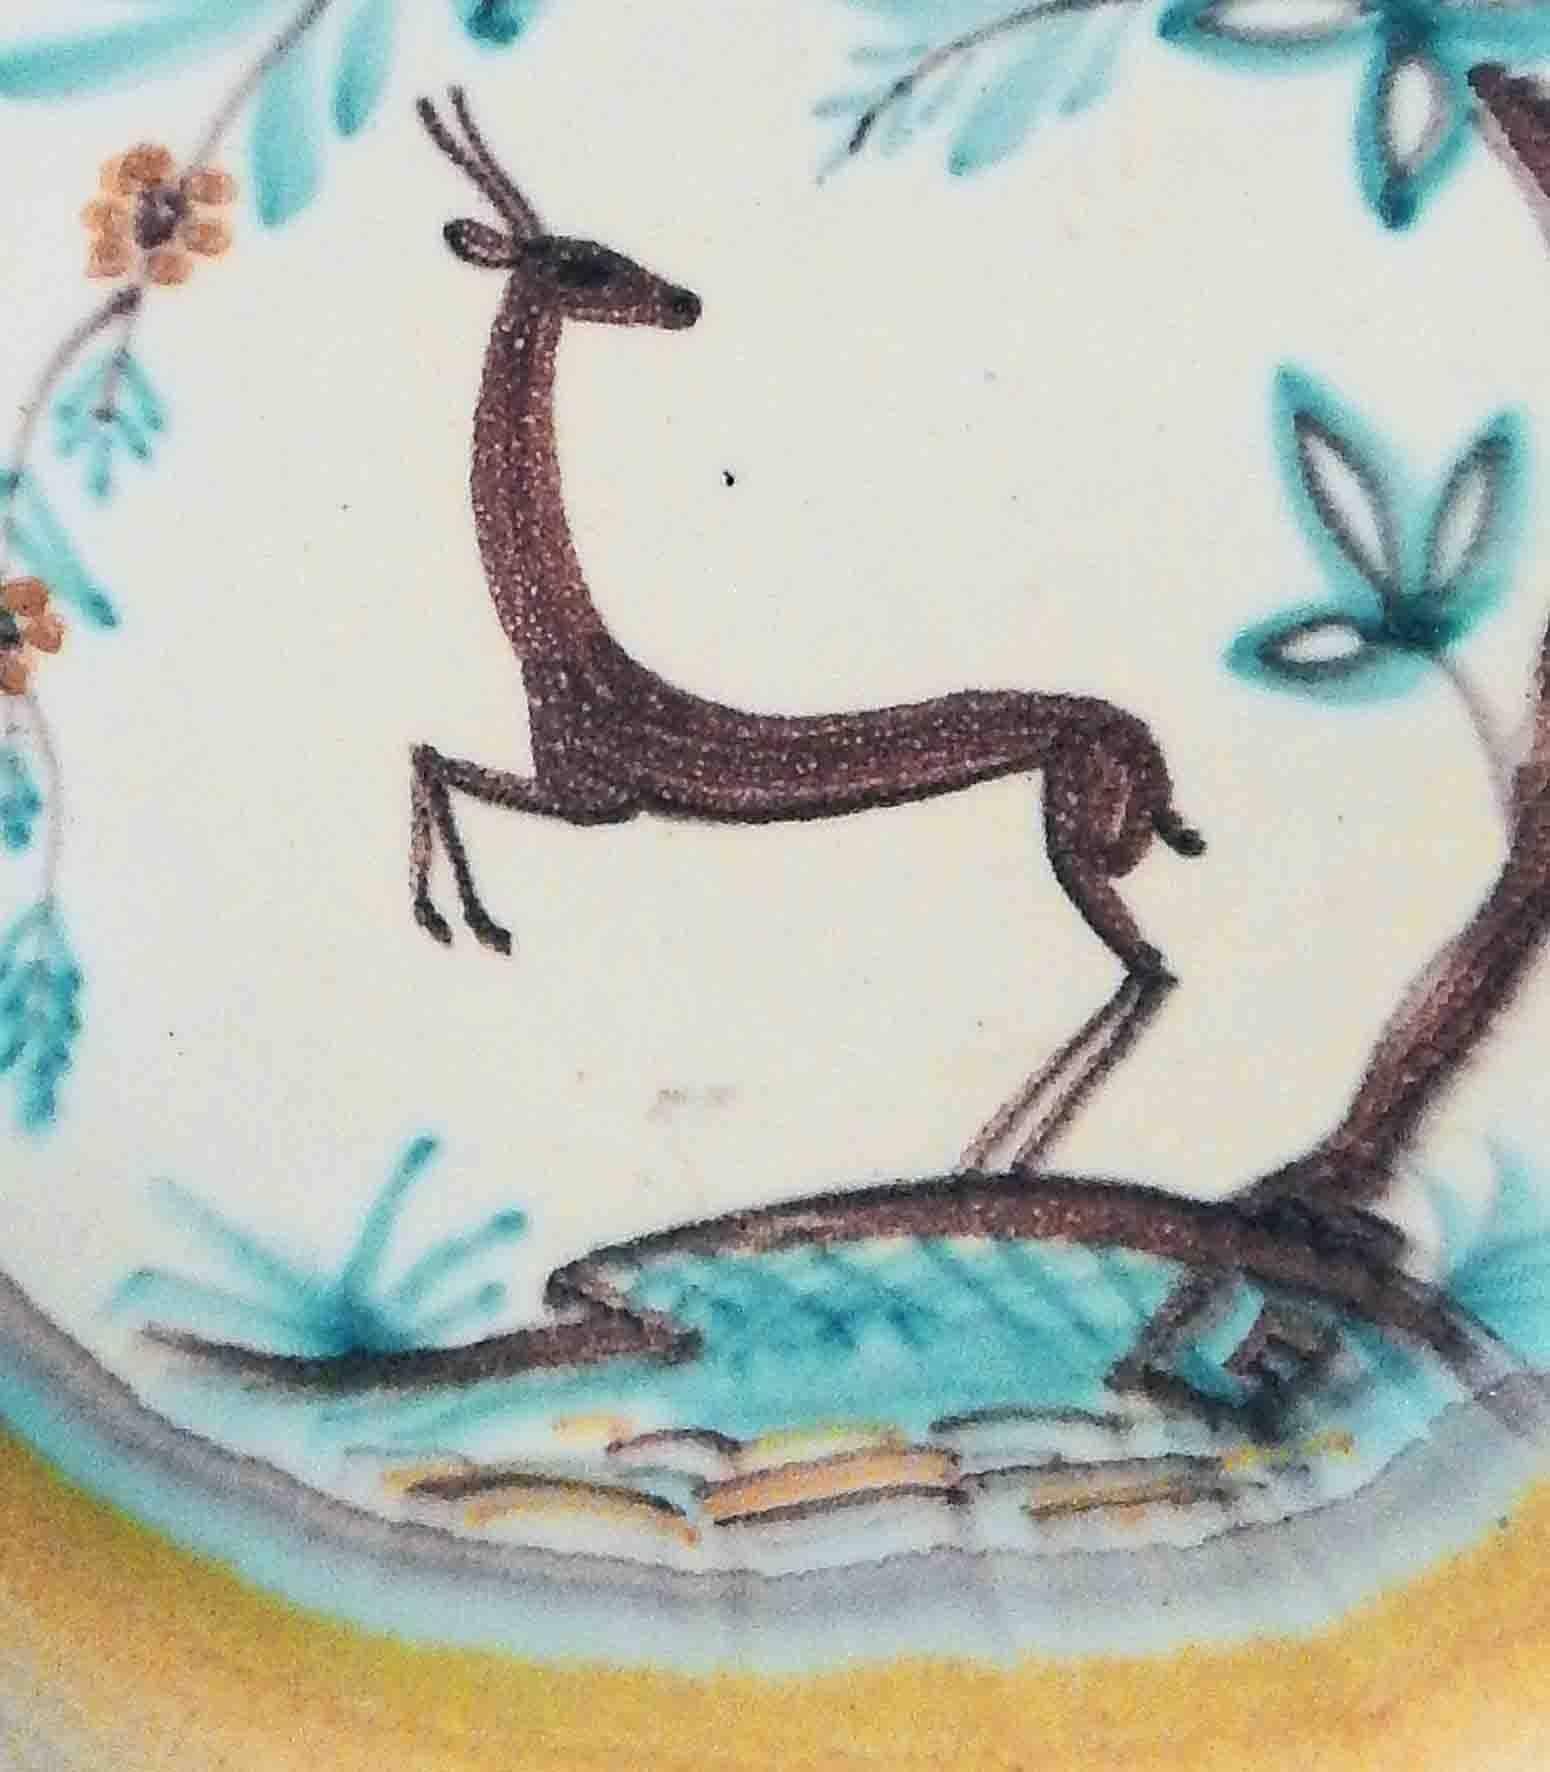 Beautifully glazed in sky blues and golden yellows, this large, low Art Deco bowl features a rearing deer highly stylized in the manner of the period below an arching tree with oversized foliage. This piece was created in Finland, probably in the